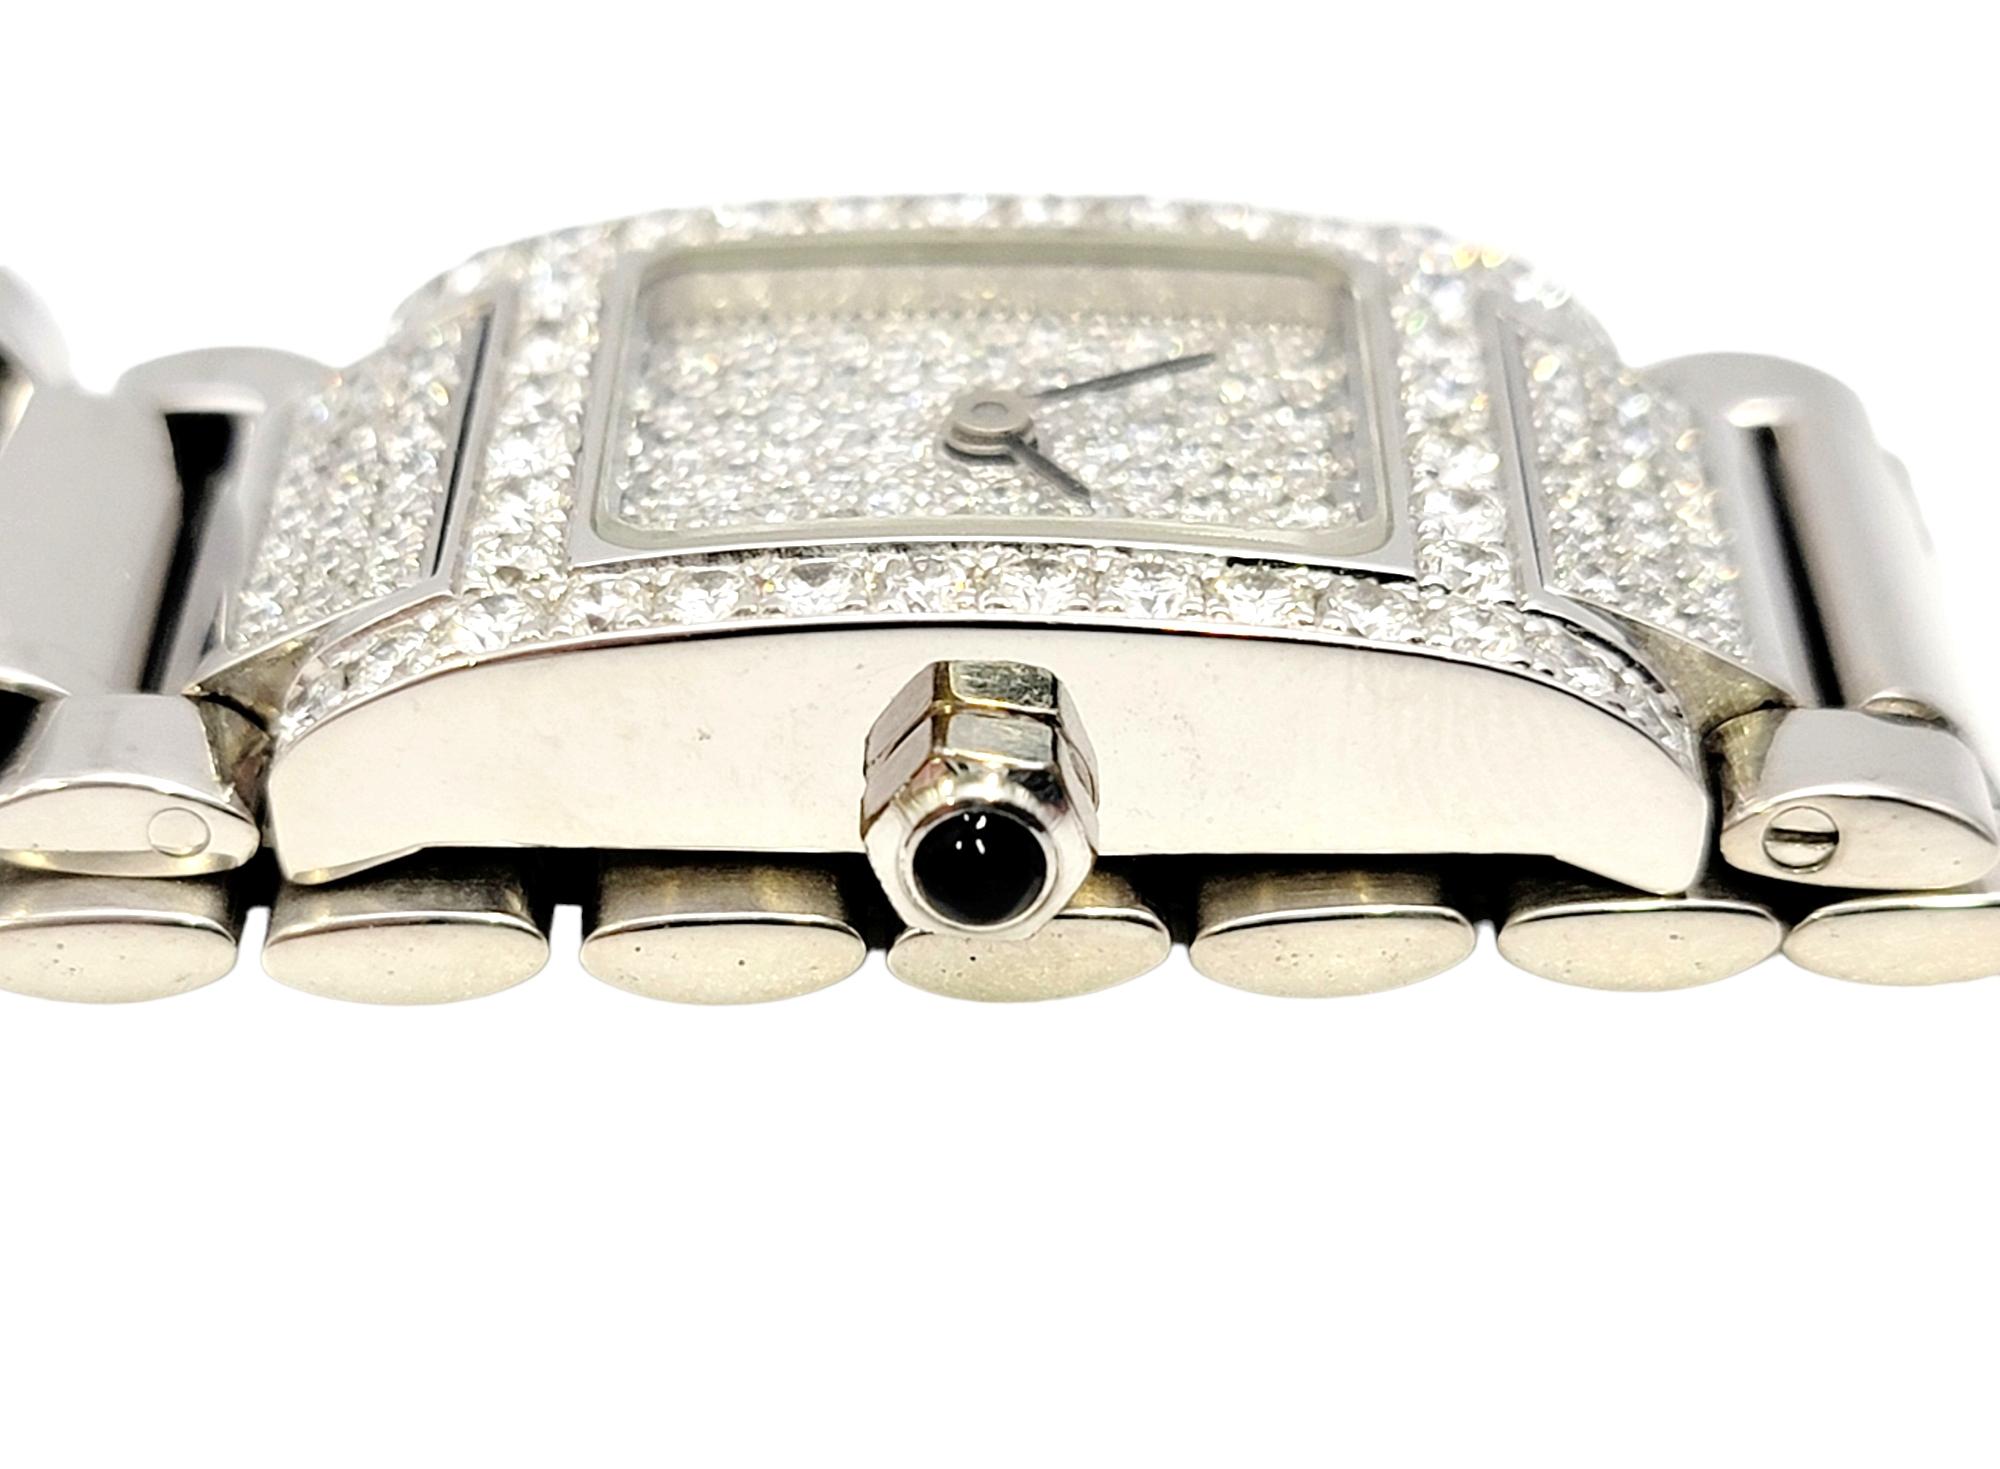 Alain Philippe Ladies 18 Karat White Gold and Pave Diamond Wristwatch F-G / VS In Good Condition For Sale In Scottsdale, AZ